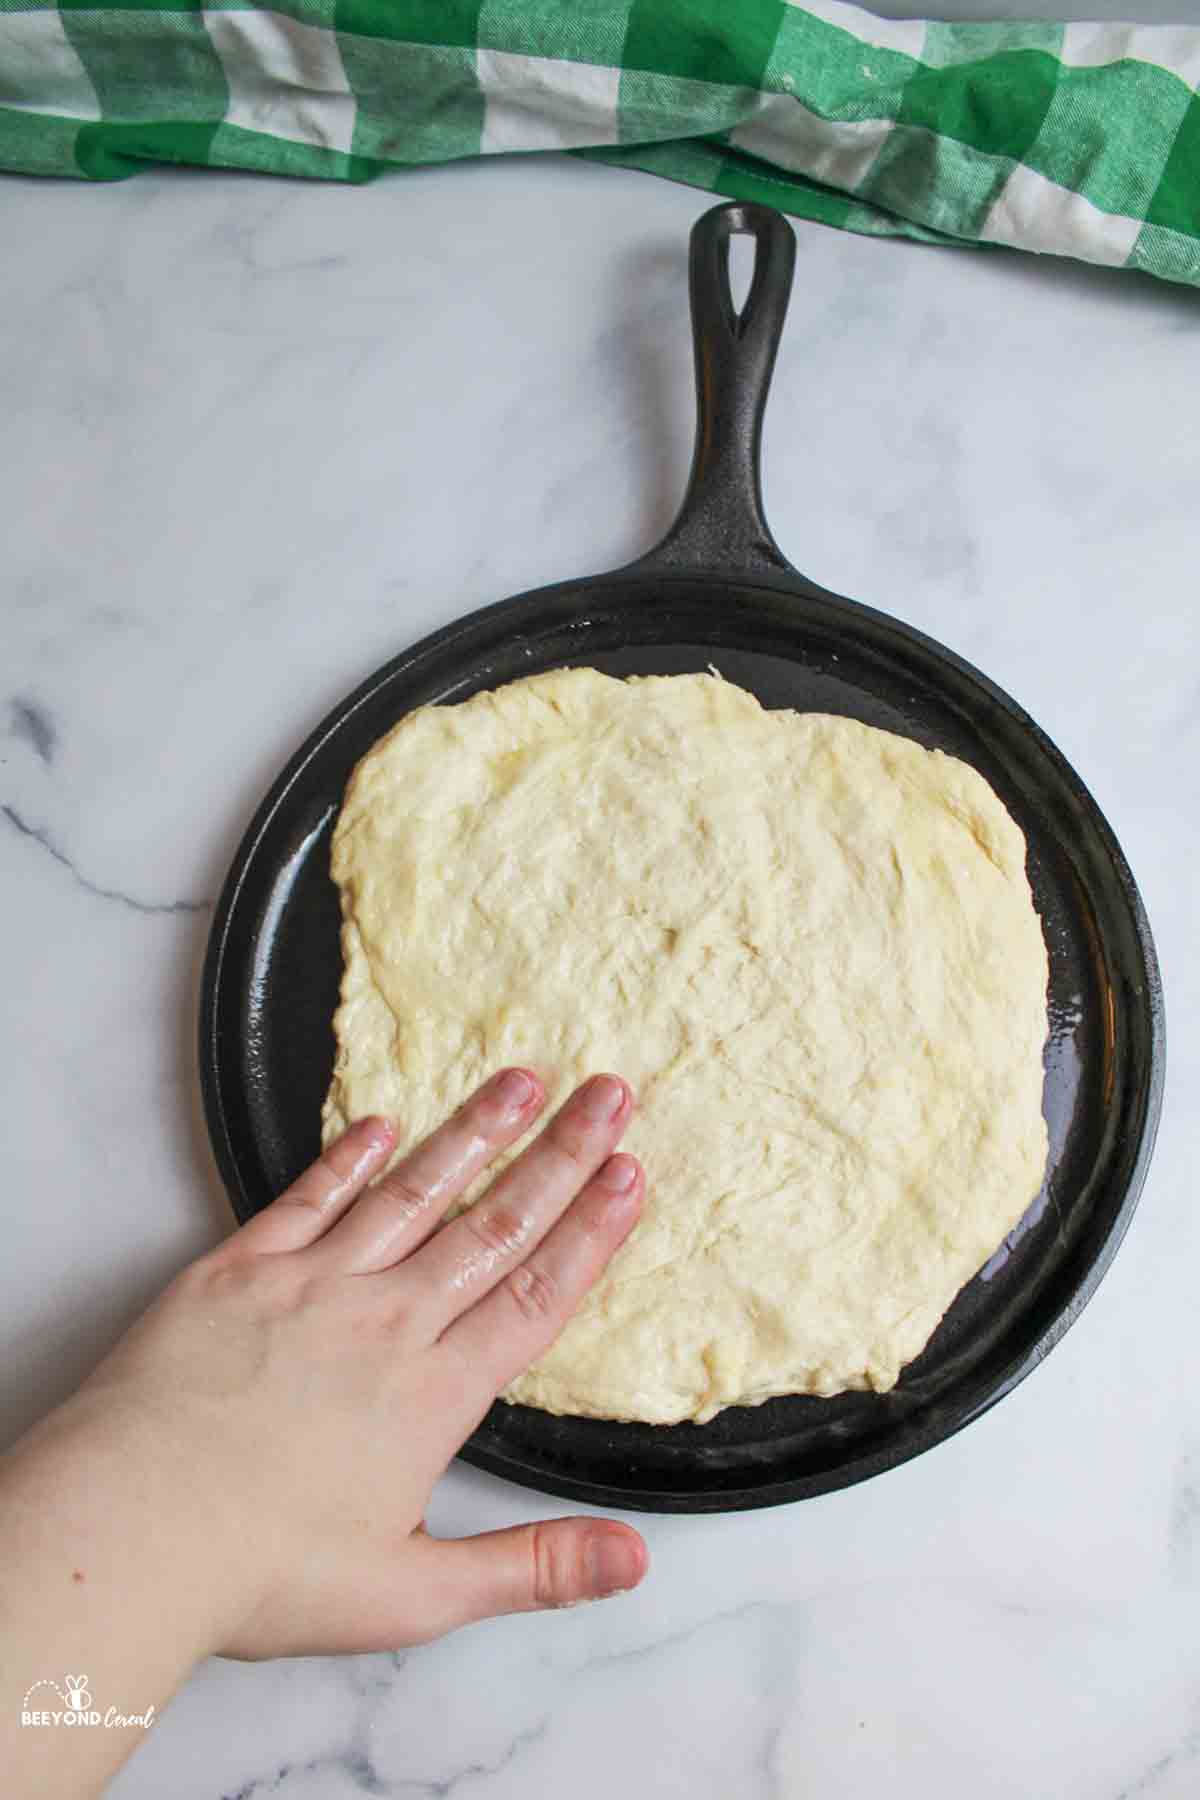 hand pressing dough out into a round circle on a greased iron skillet